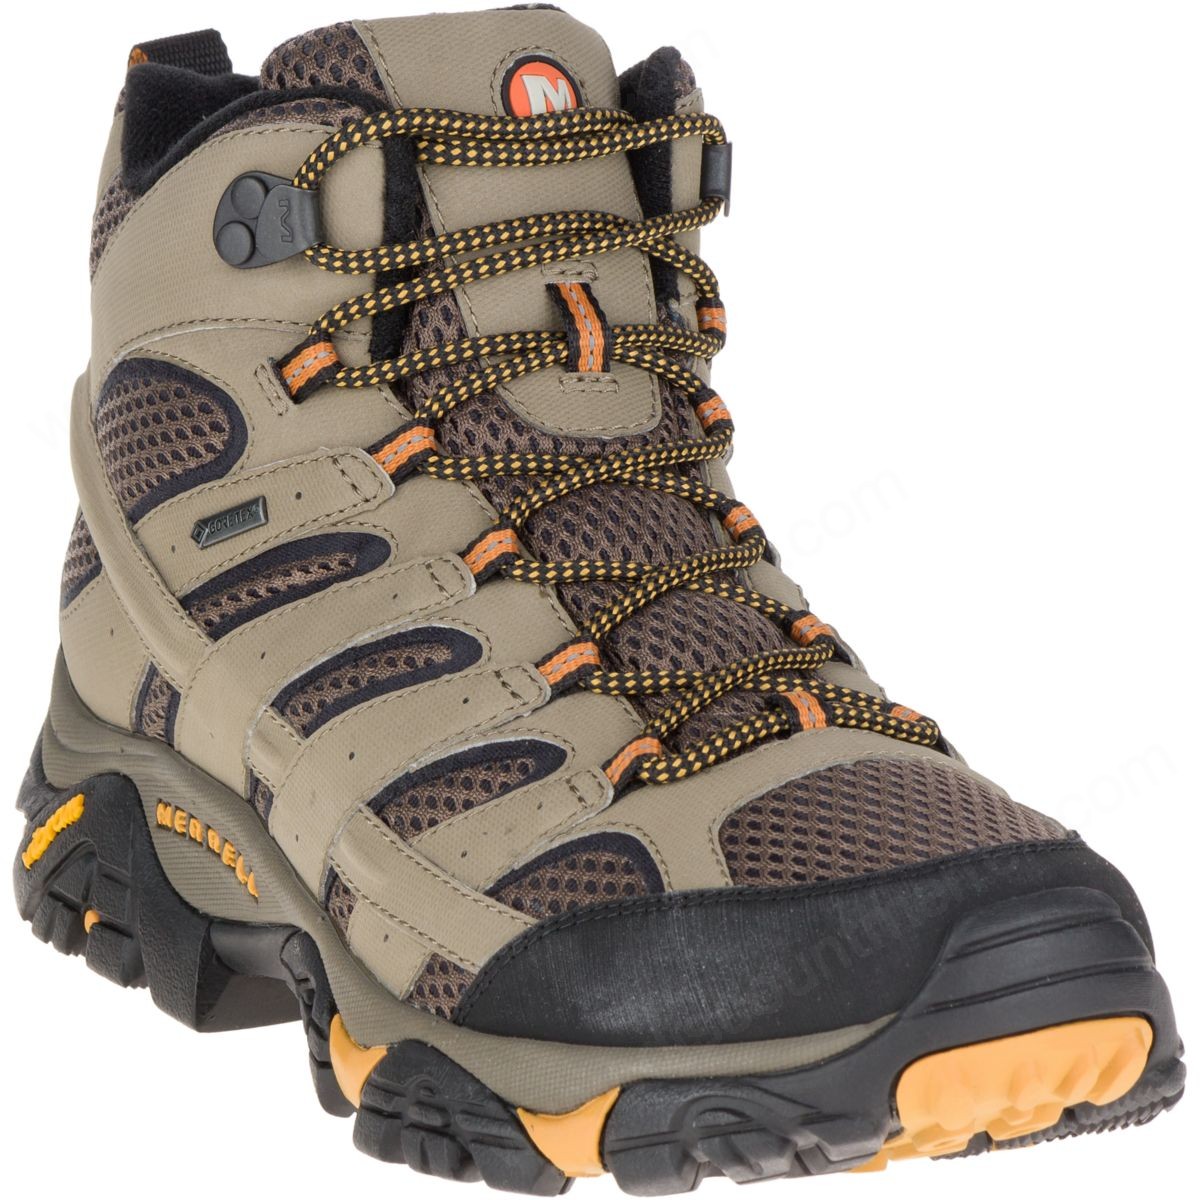 Merrell Man's Moab Mother Of All Boots™ Mid Gore-Tex® Wide Width Walnut - -3